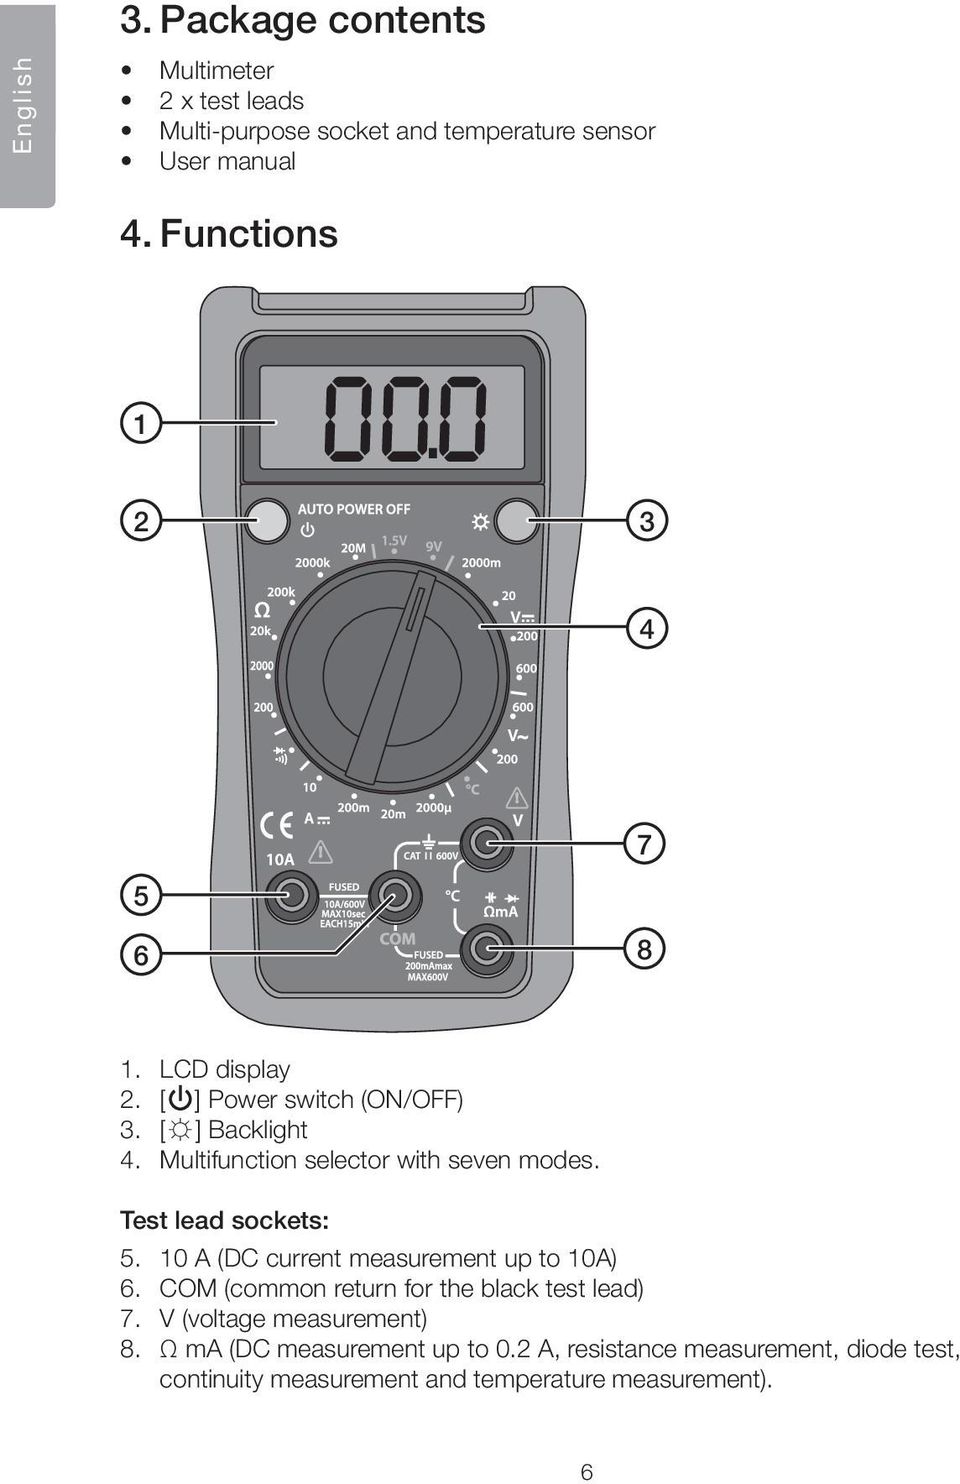 Multifunction selector with seven modes. Test lead sockets: 5. 10 A (DC current measurement up to 10A) 6.